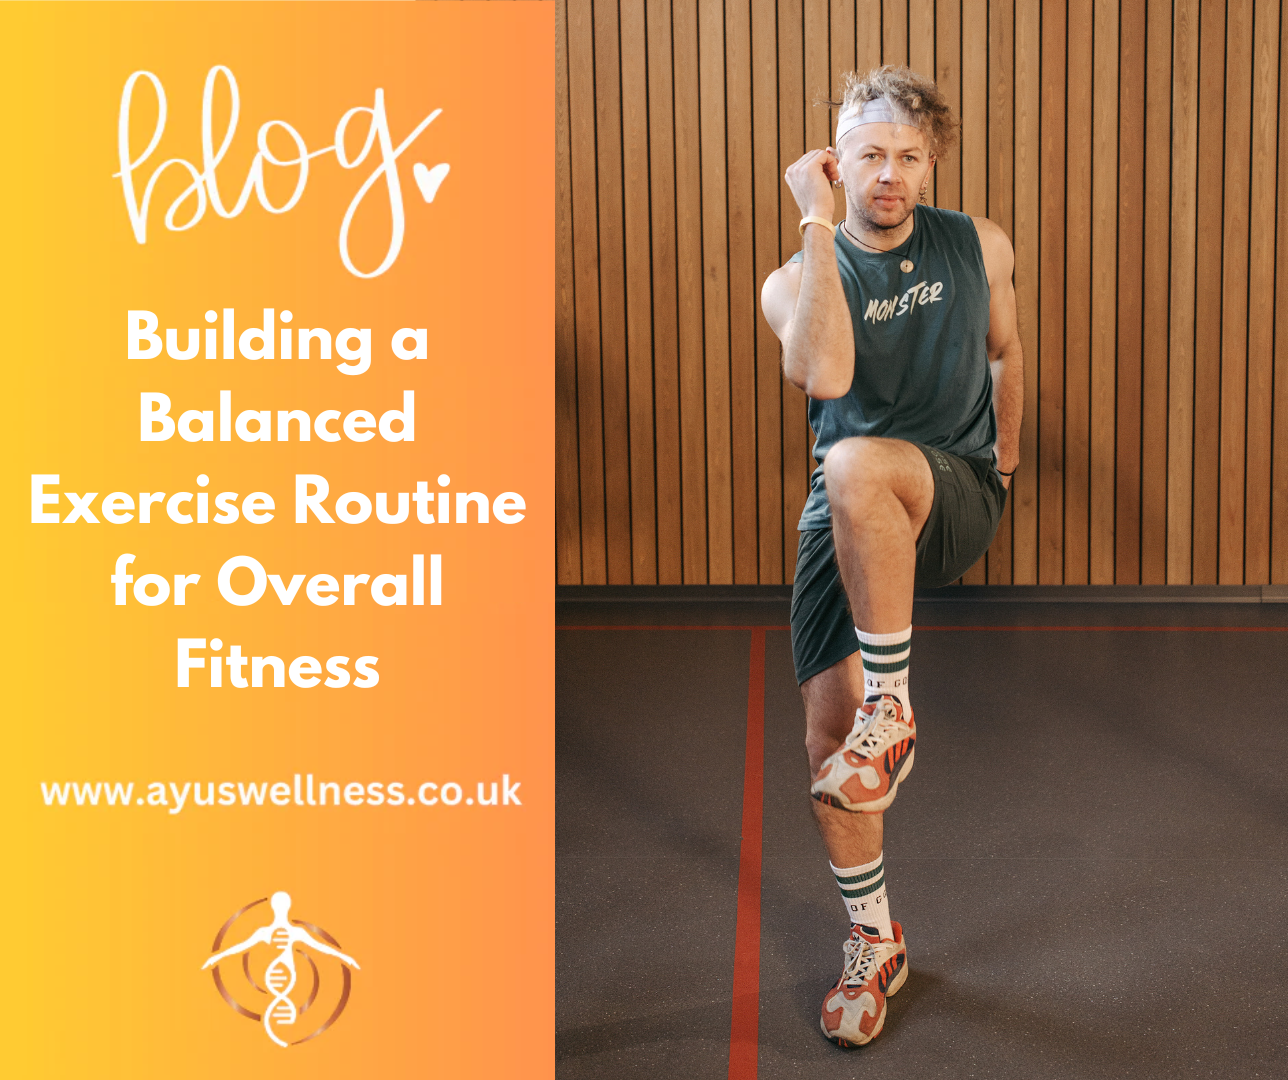 Building a Balanced Exercise Routine for Overall Fitness